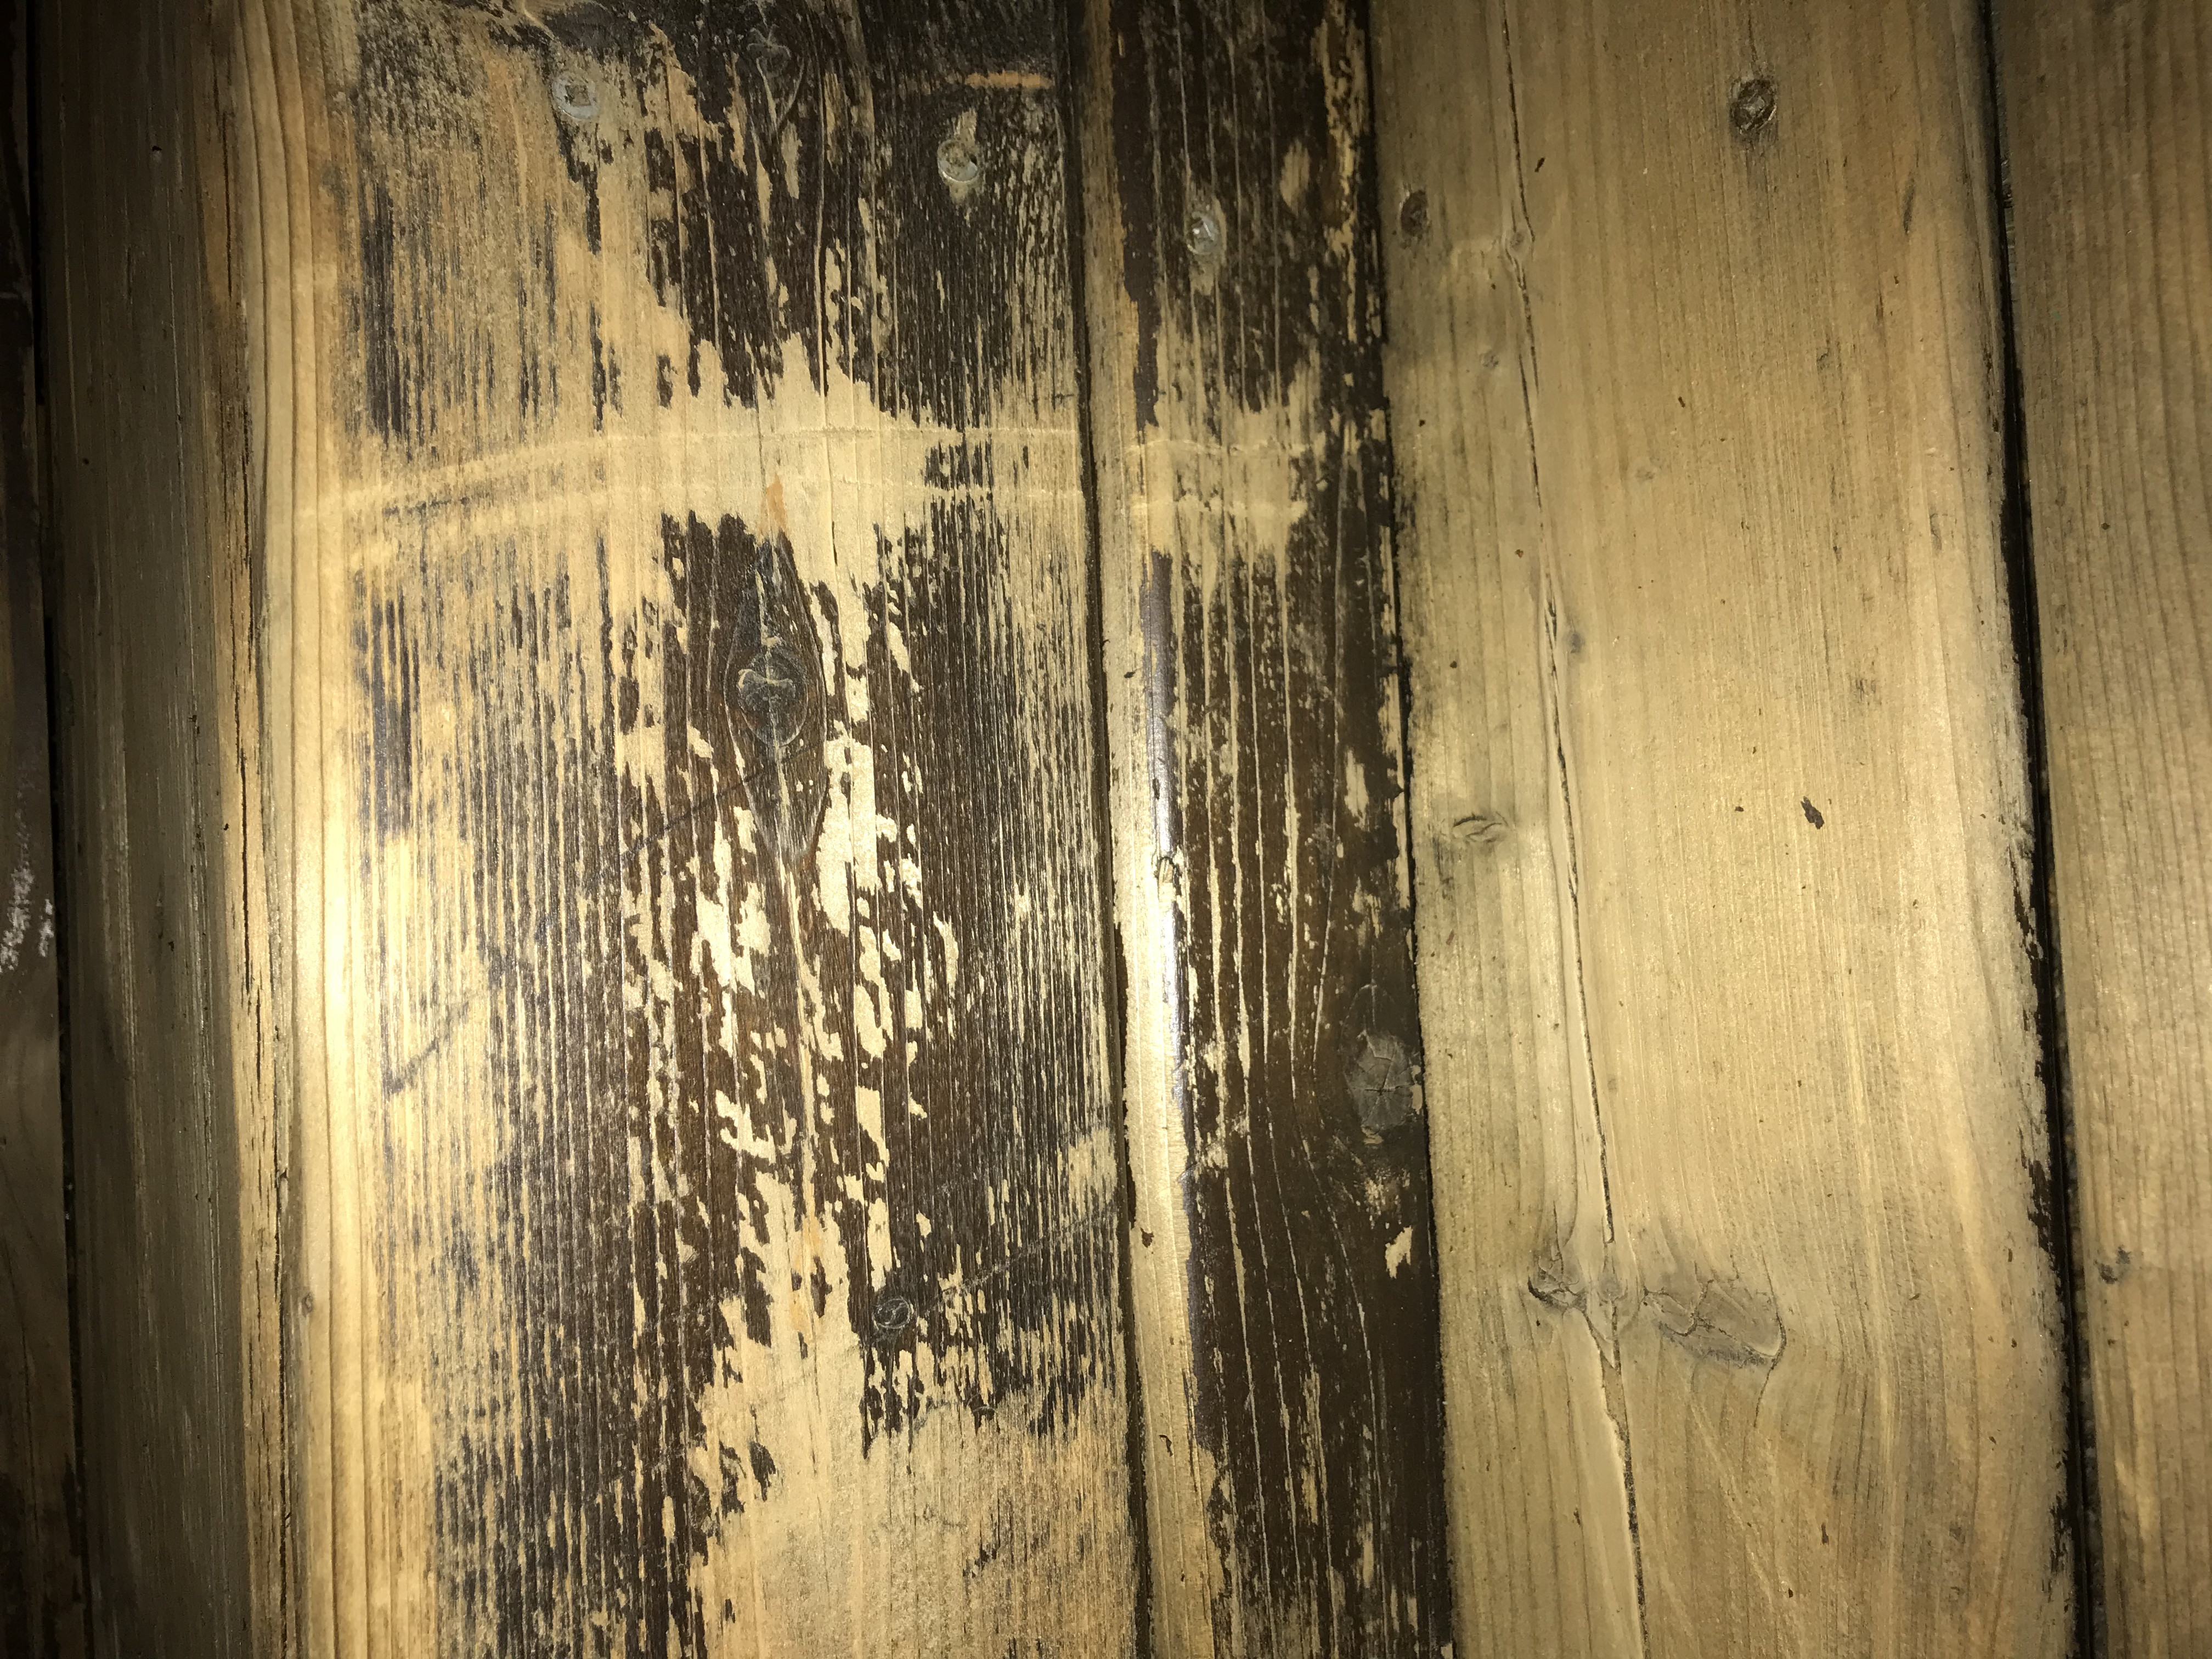 average cost to restain hardwood floors of deck stripping removing an old deck stain best deck stain in 22b4c93e 057f 4f9d b8f8 491a4bb825b2